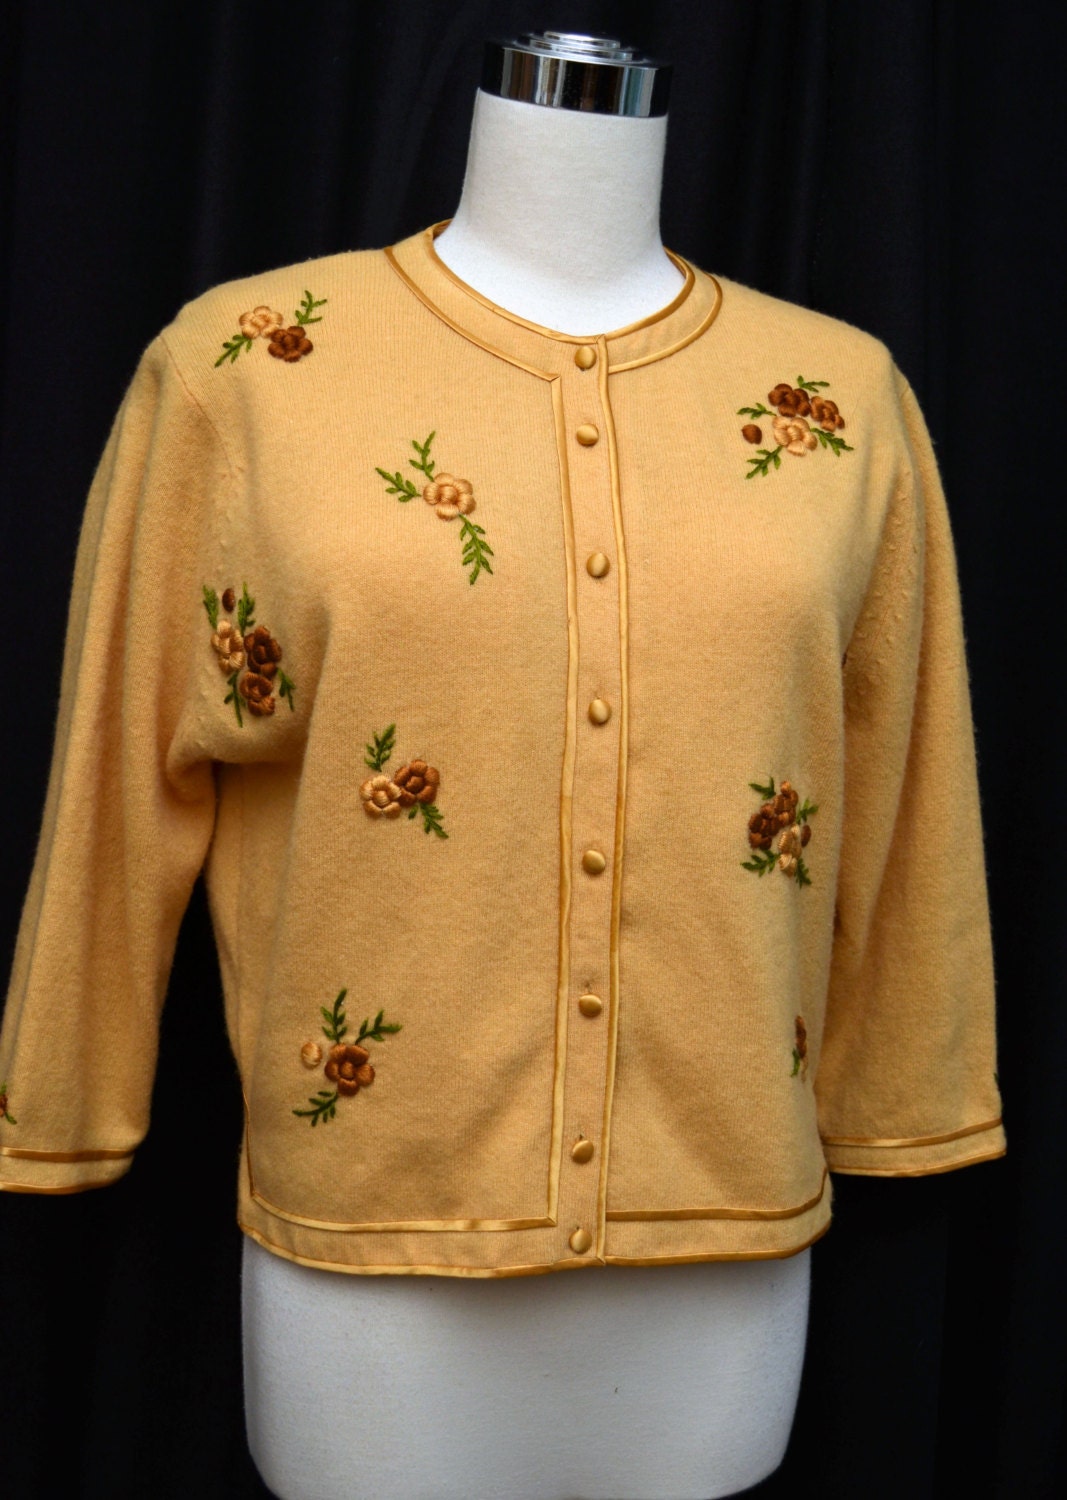 Vintage 60s Gold Embroidered Sweater Cardigan with Floral Sprays Satin Trim and Buttons - VintageDevotion